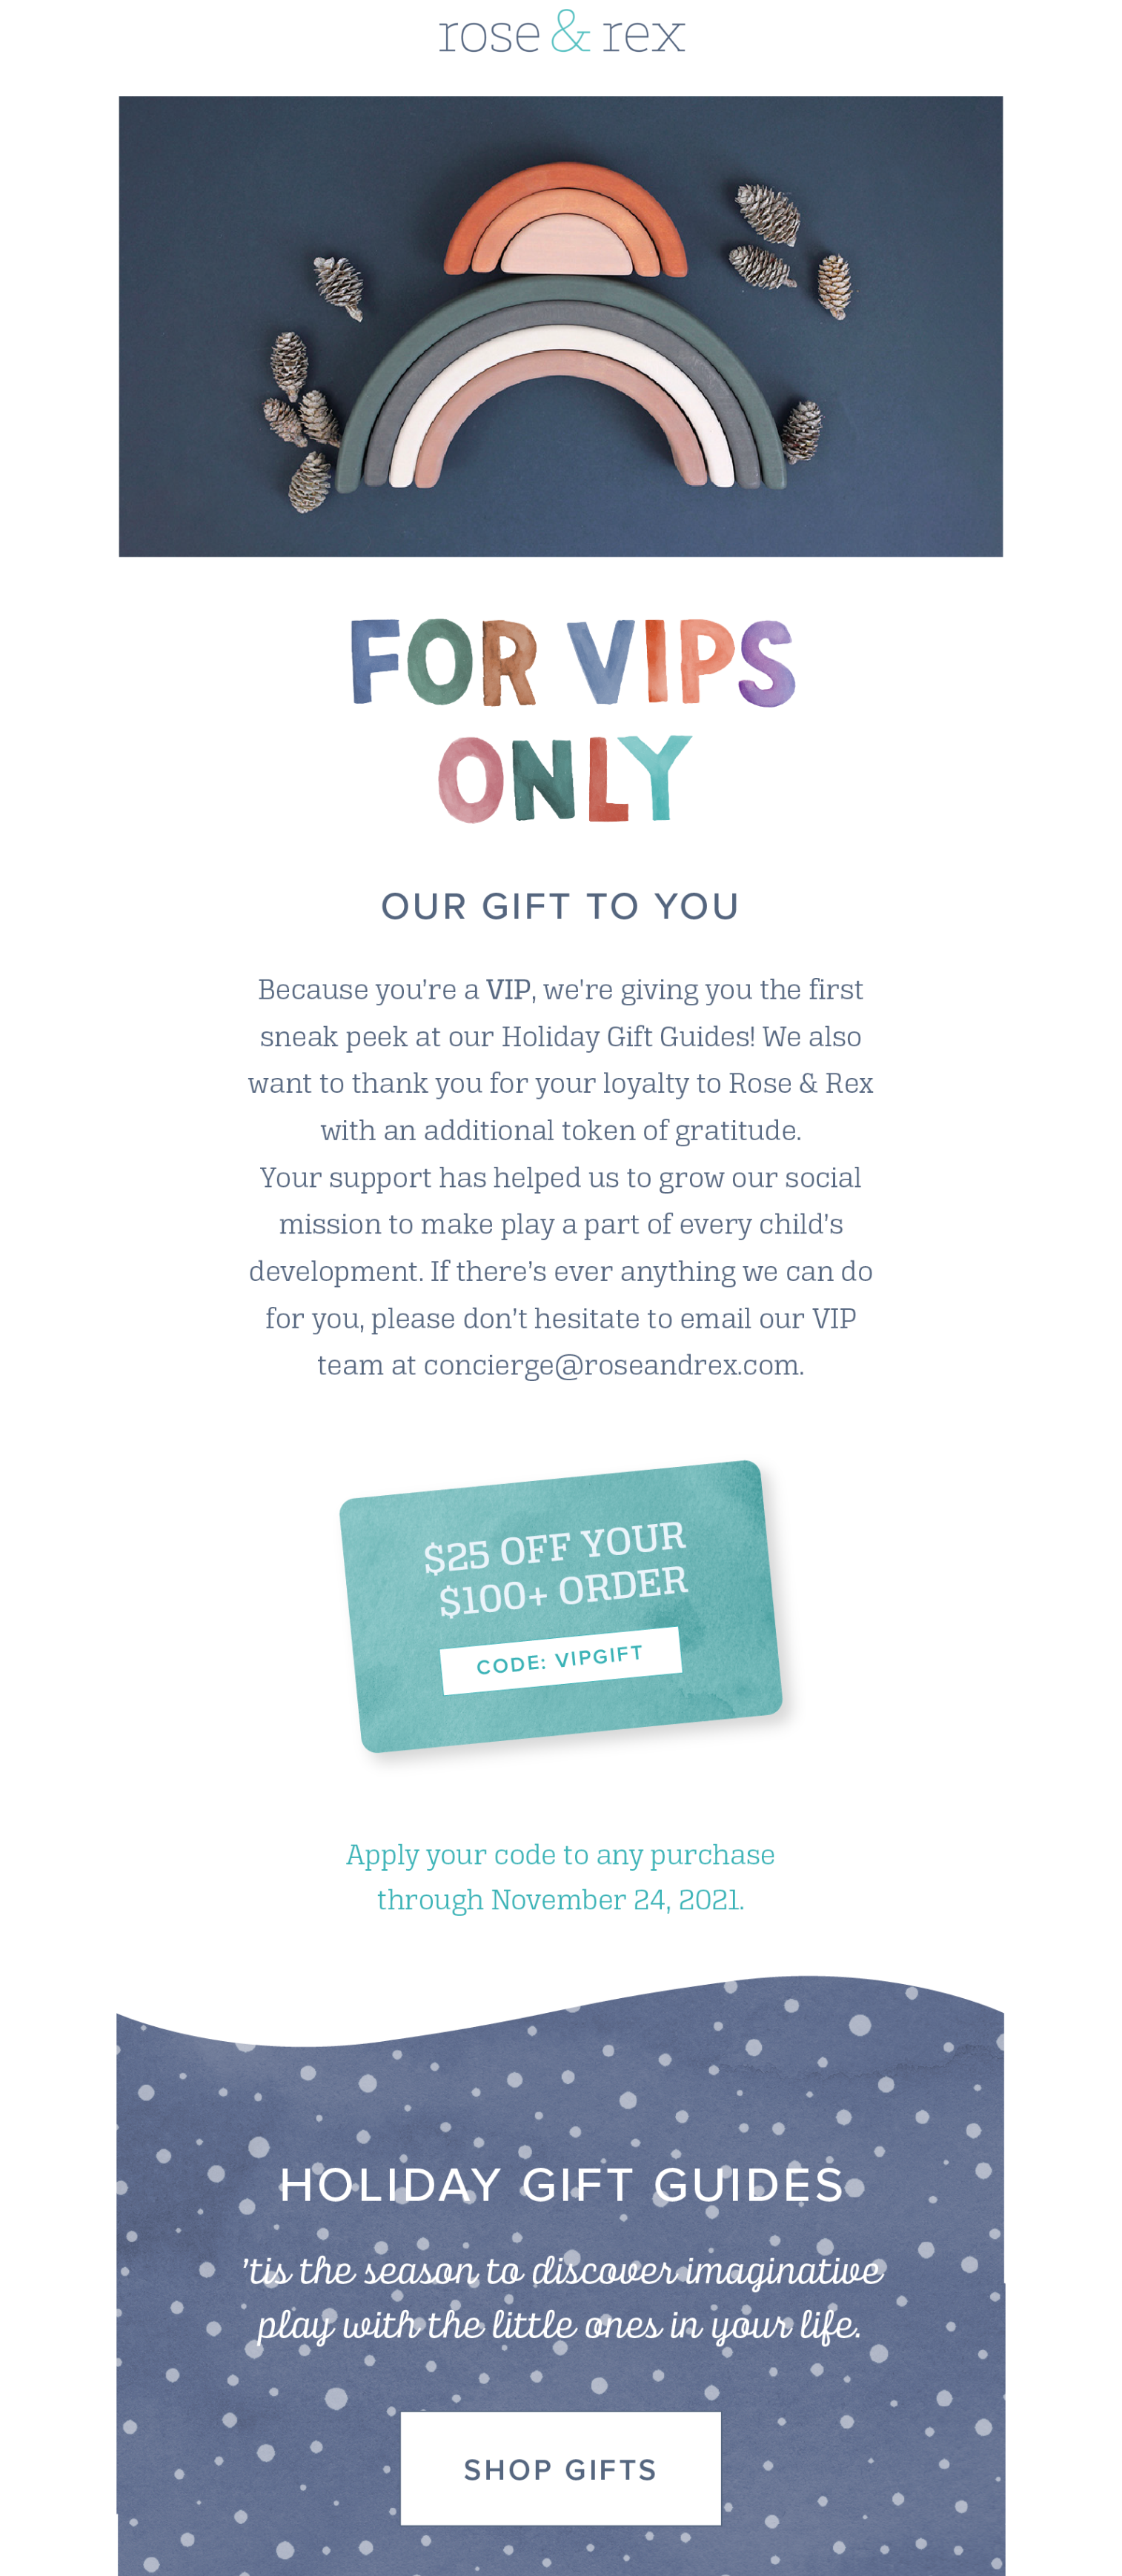 Best Loyalty Program Email Examples–A screenshot of an email campaign from Rose & Rex. The title is "For VIPs Only. Our Gift to You". The email offers readers $25 off their order of $100 or more and provides early access to Rose & Rex's Holiday Gift Guides. 